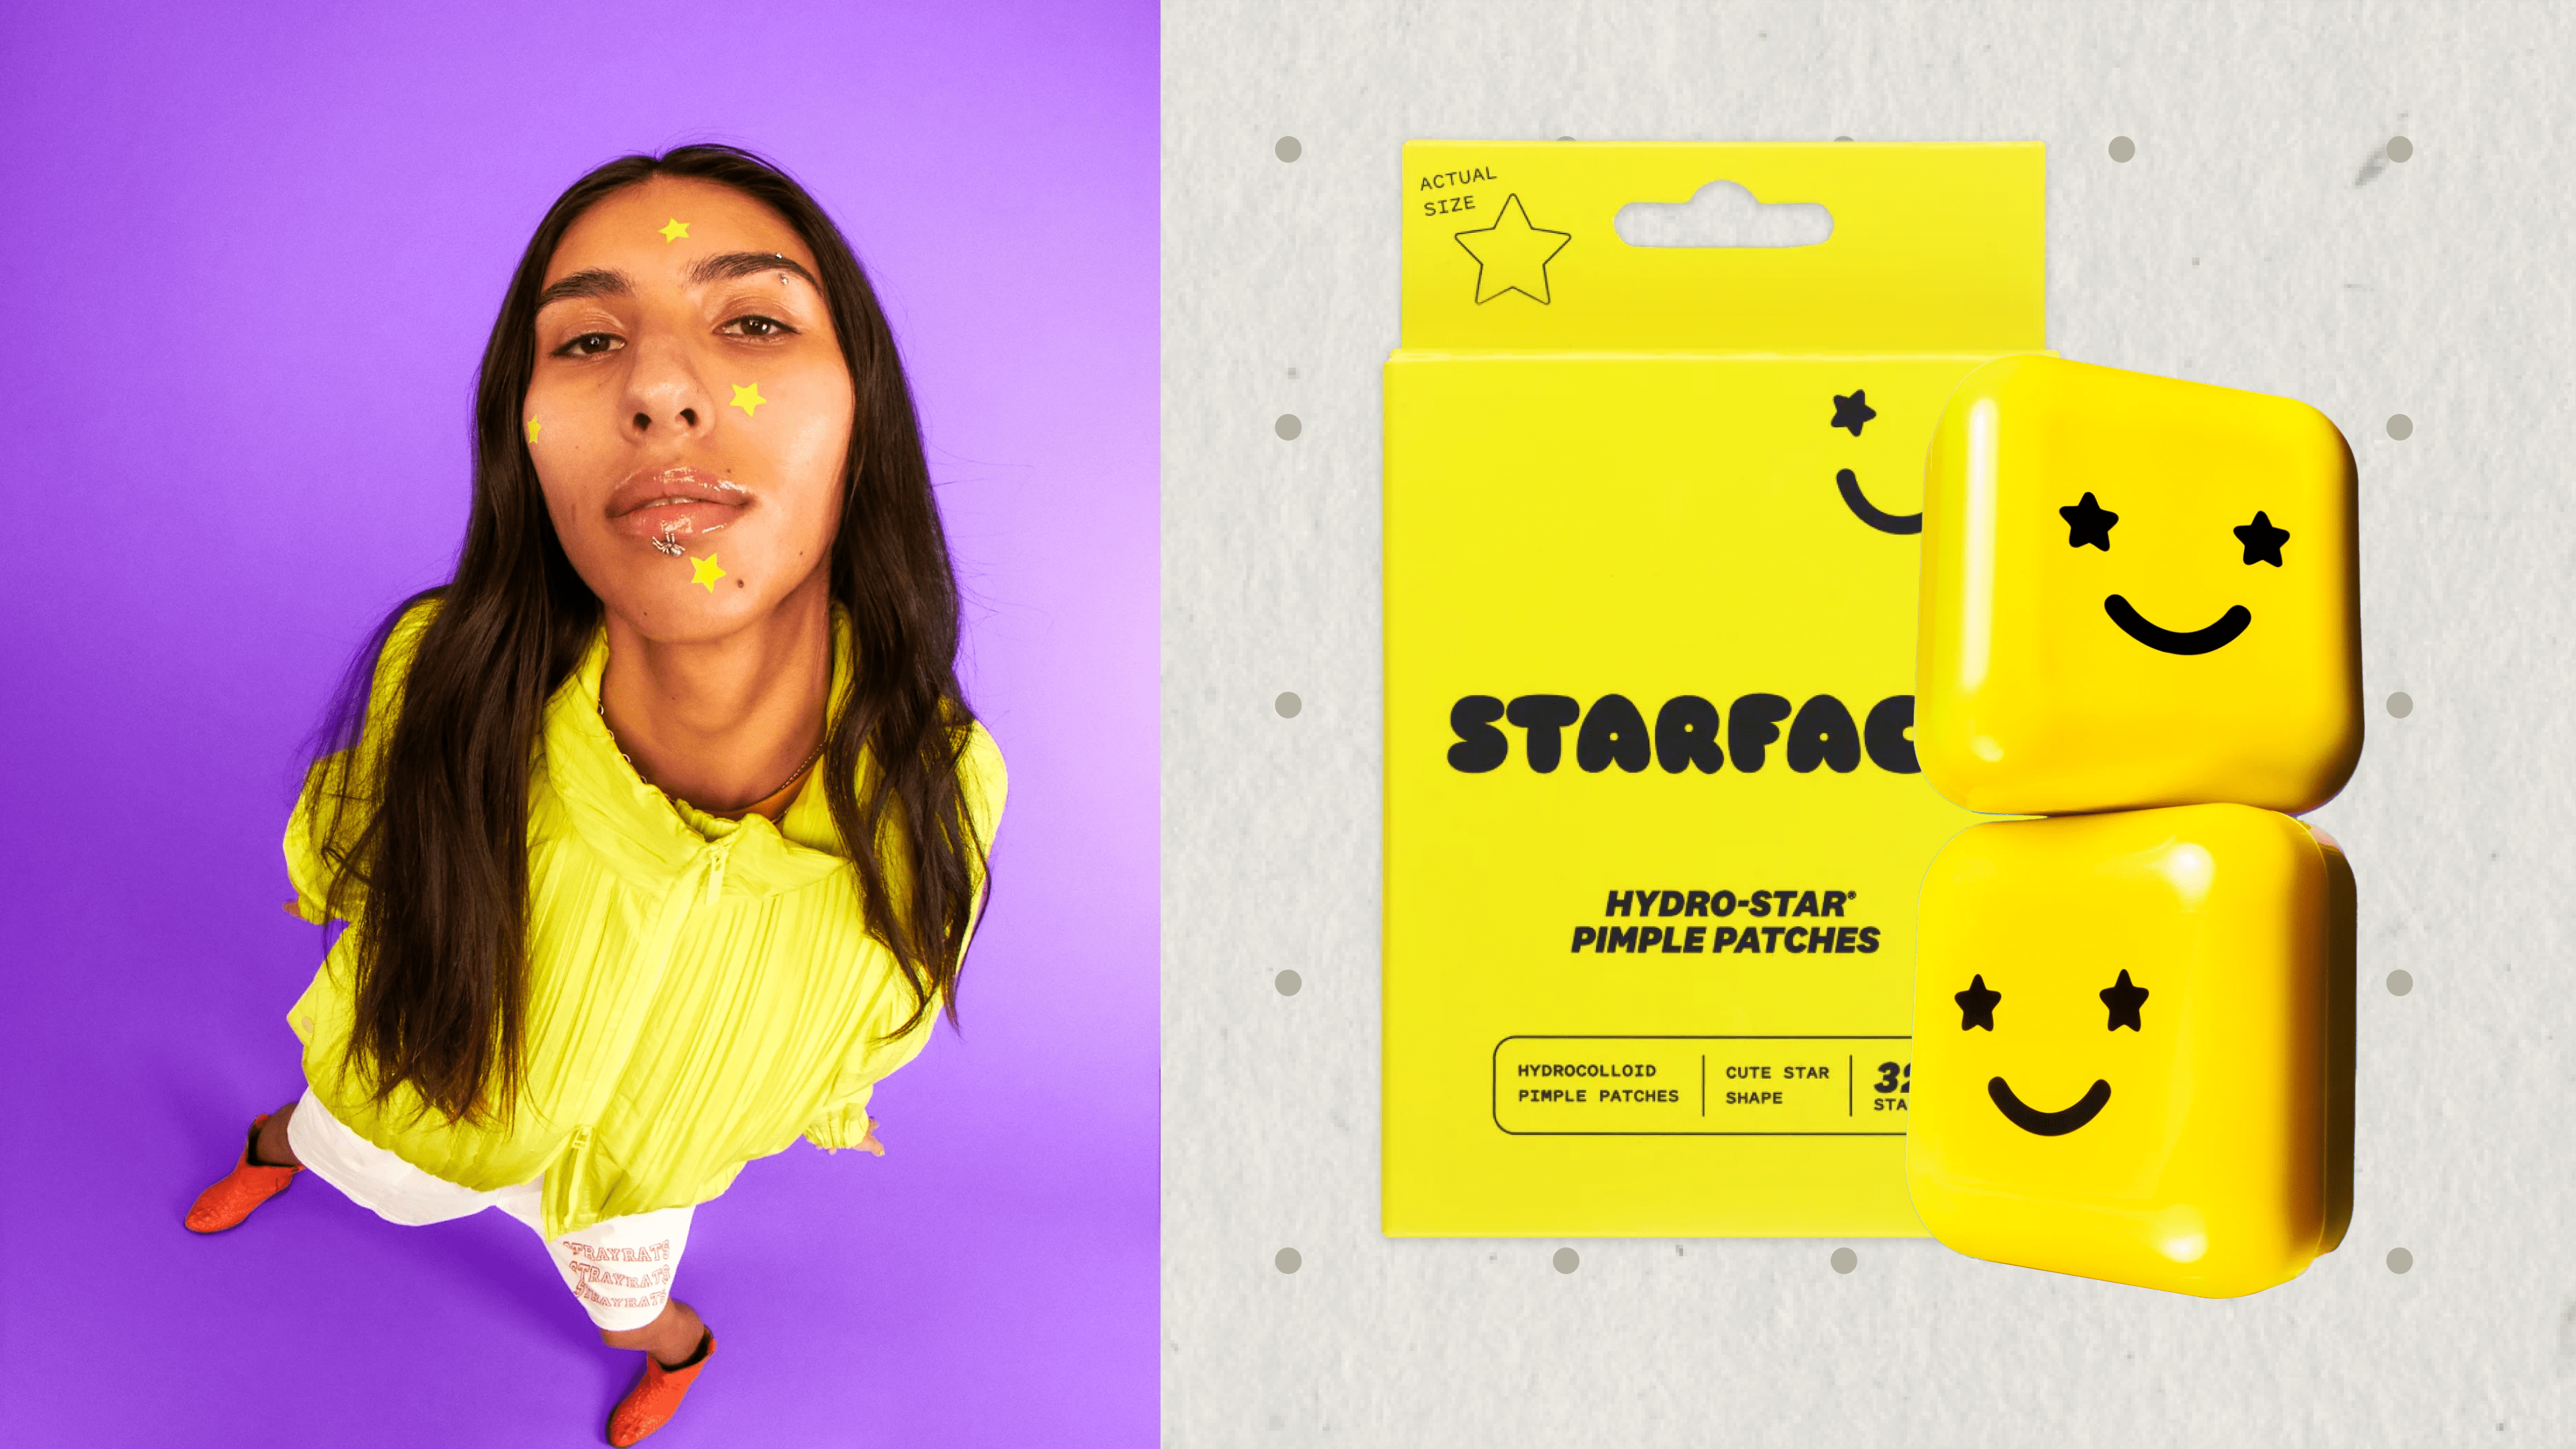 Starface pimple patches